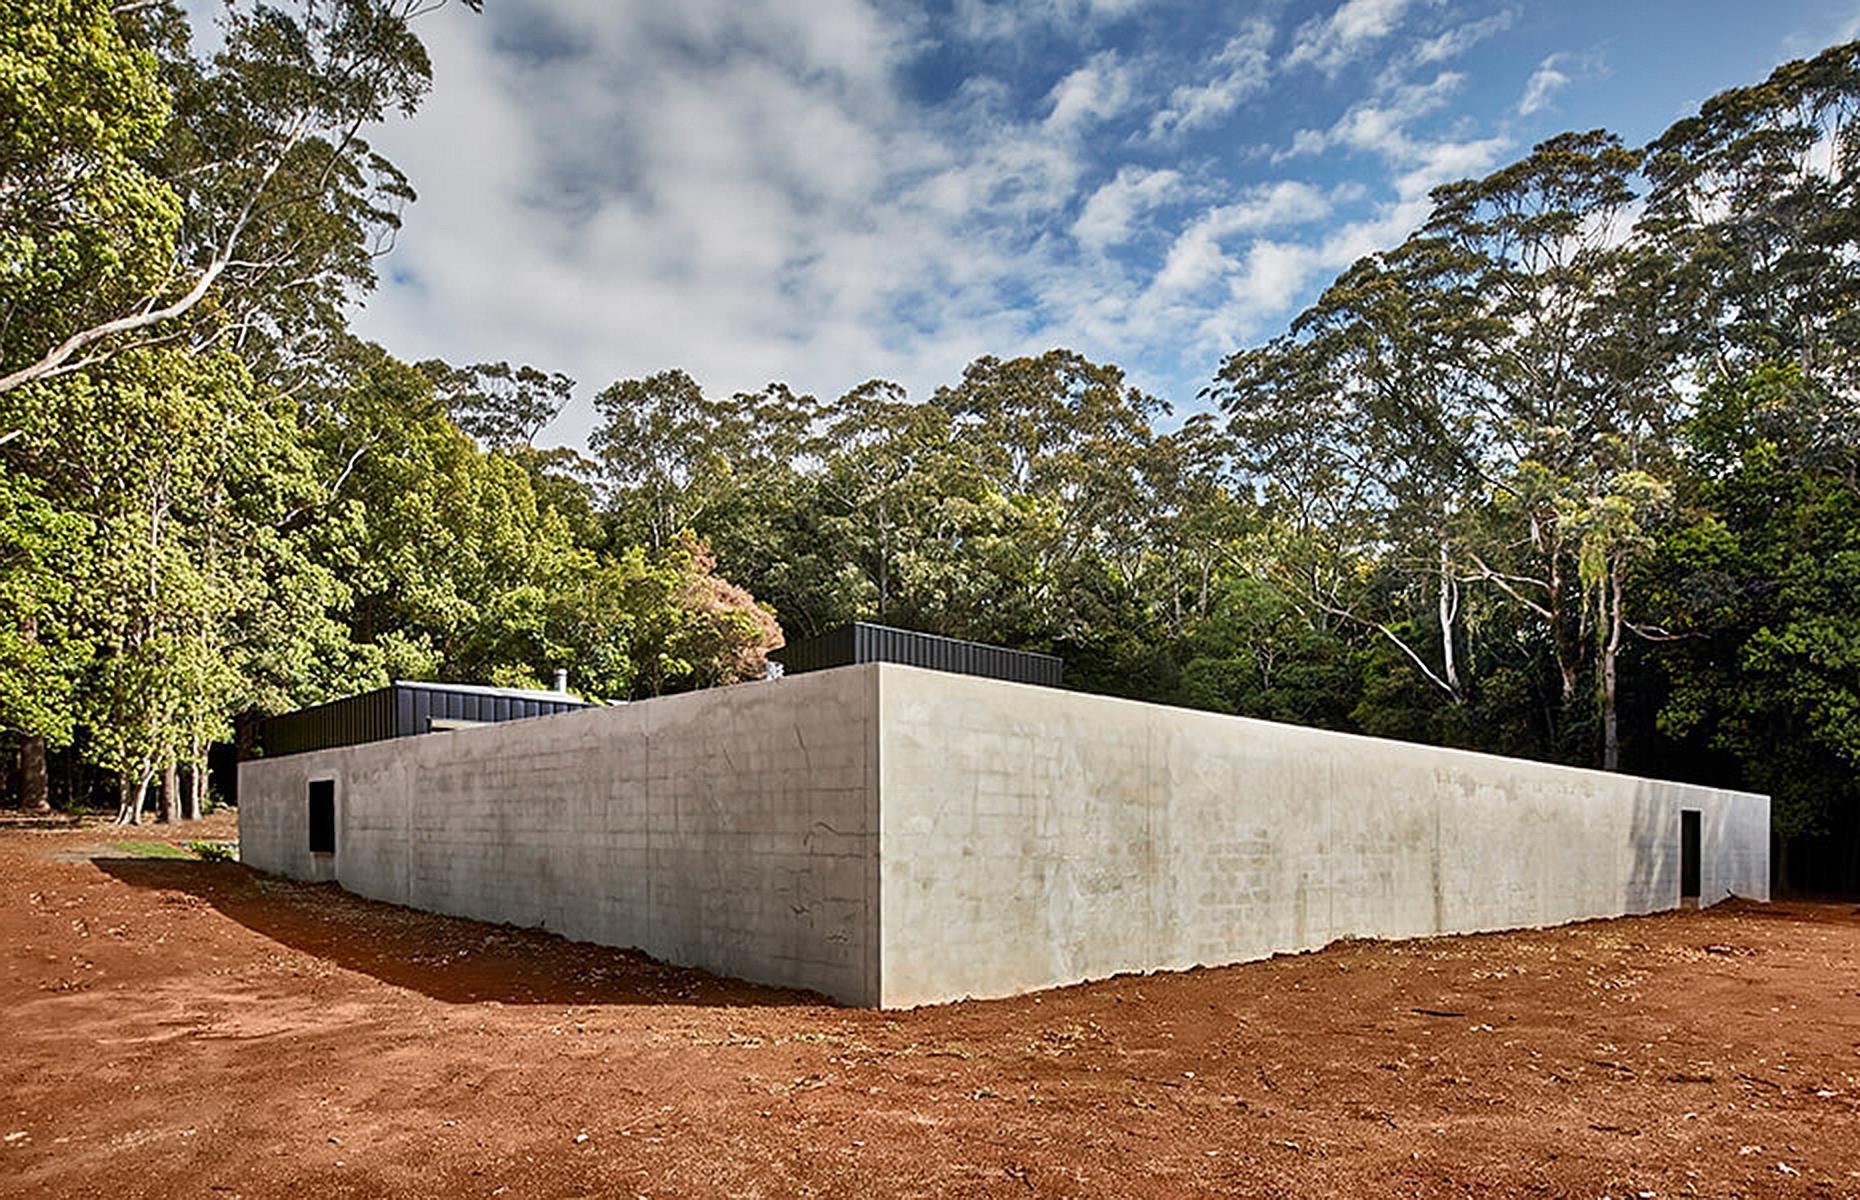 <p> Uninvited guests would have a hard time getting inside this fortified home in the village of Berry, in Australia's New South Wales region. Believe it or not, behind this unassuming brick structure hides a secure and surprisingly stylish home. </p>